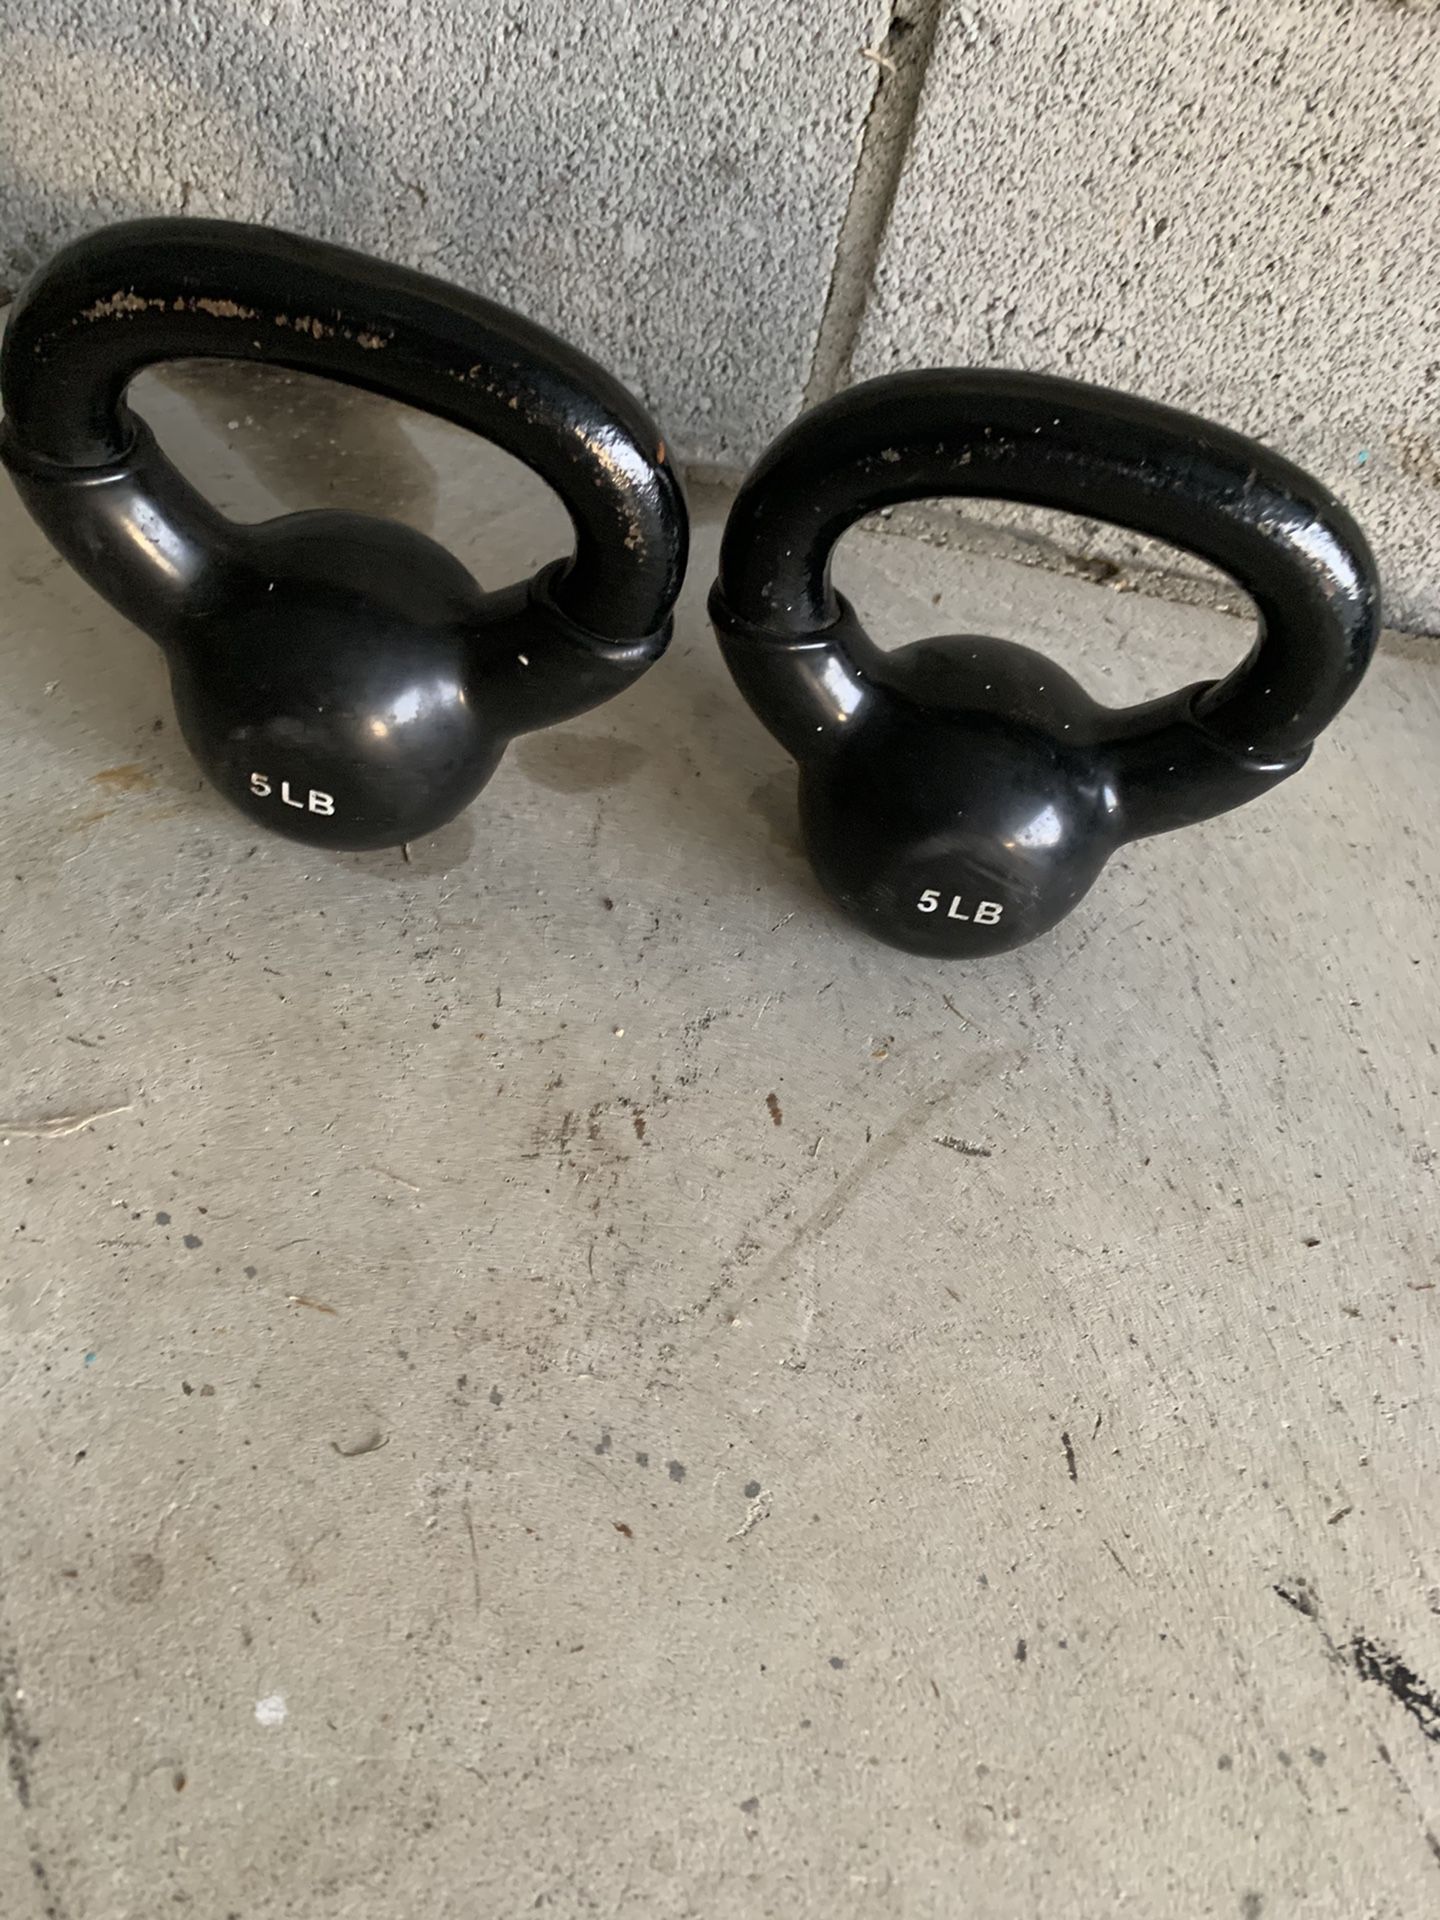 Pair of 5 LB Kettle Bell Weights